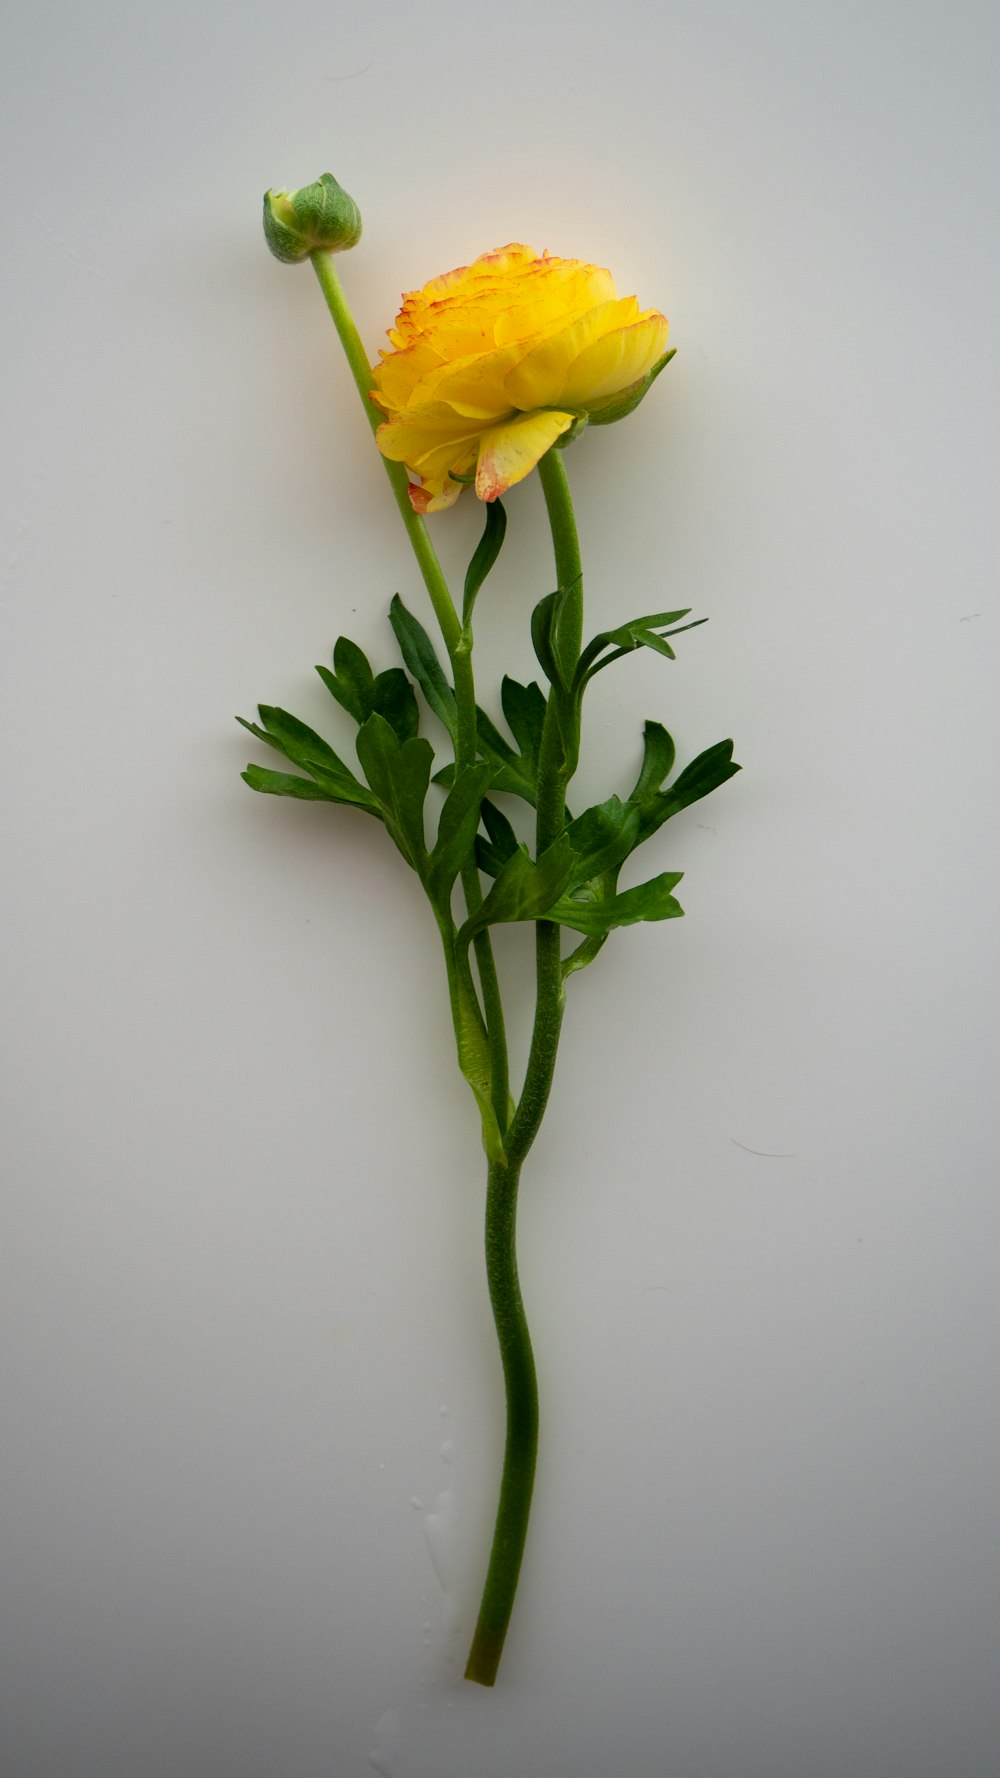 yellow flower on white surface